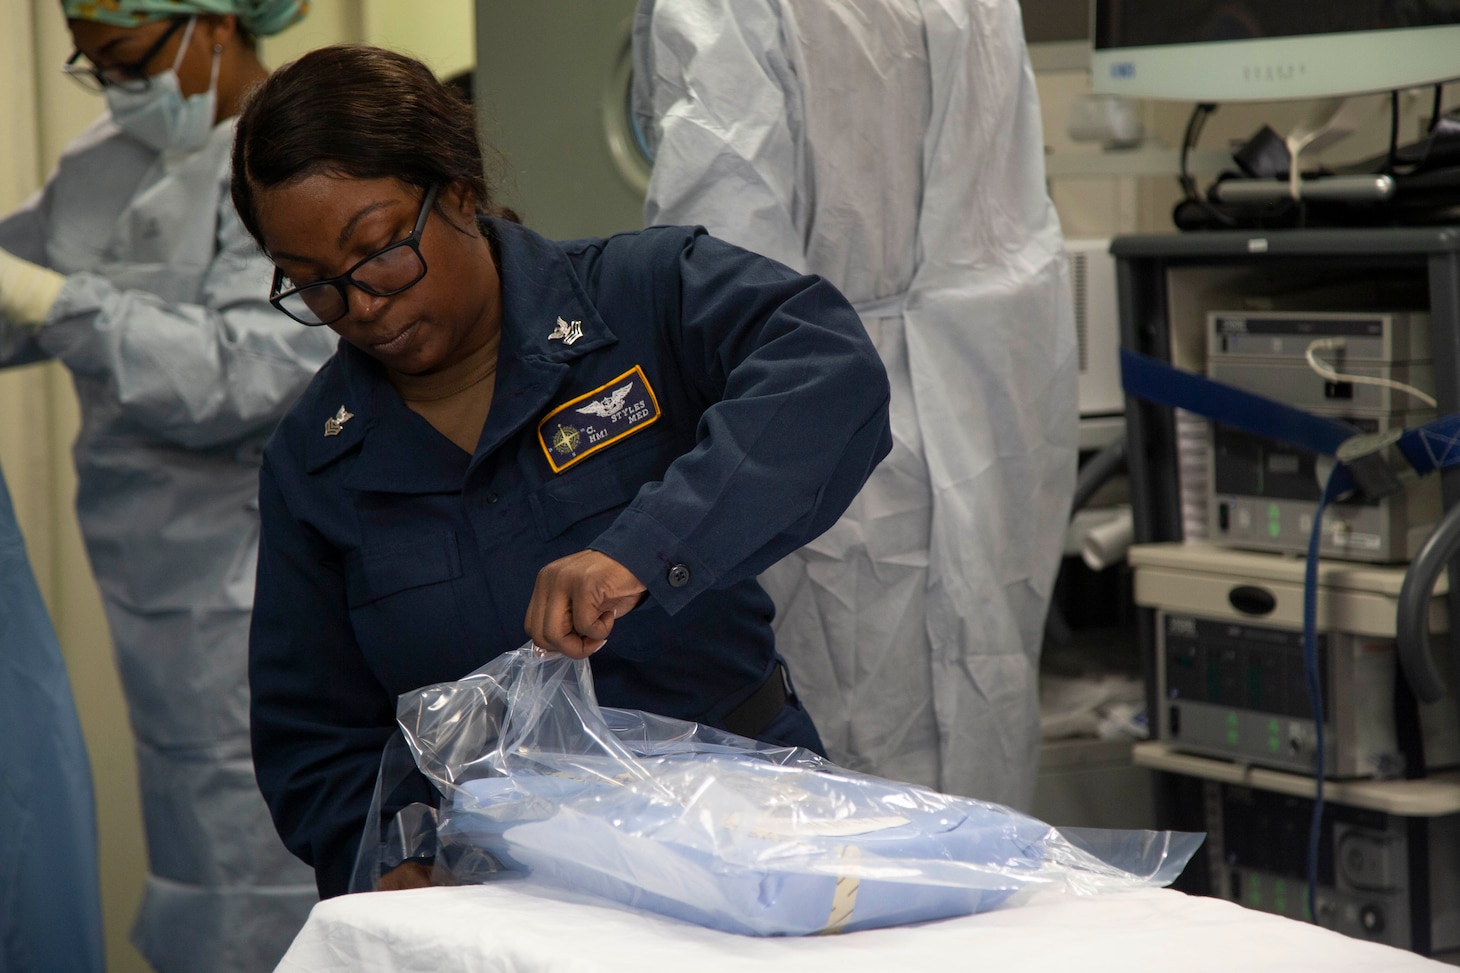 Hospital Corpsman 1st Class Cassandra Styles, from Oxford, Mississippi, assigned to USS Gerald R. Ford's (CVN 78) dental department, prepares sterile dressing during a mass casualty drill in the ship's operating room, Sept. 20th, 2022. Ford is underway in the Atlantic Ocean conducting carrier qualifications and workups for a scheduled deployment this fall. U.S. Navy photo by Mass Communication Specialist 2nd Class Jackson Adkins)